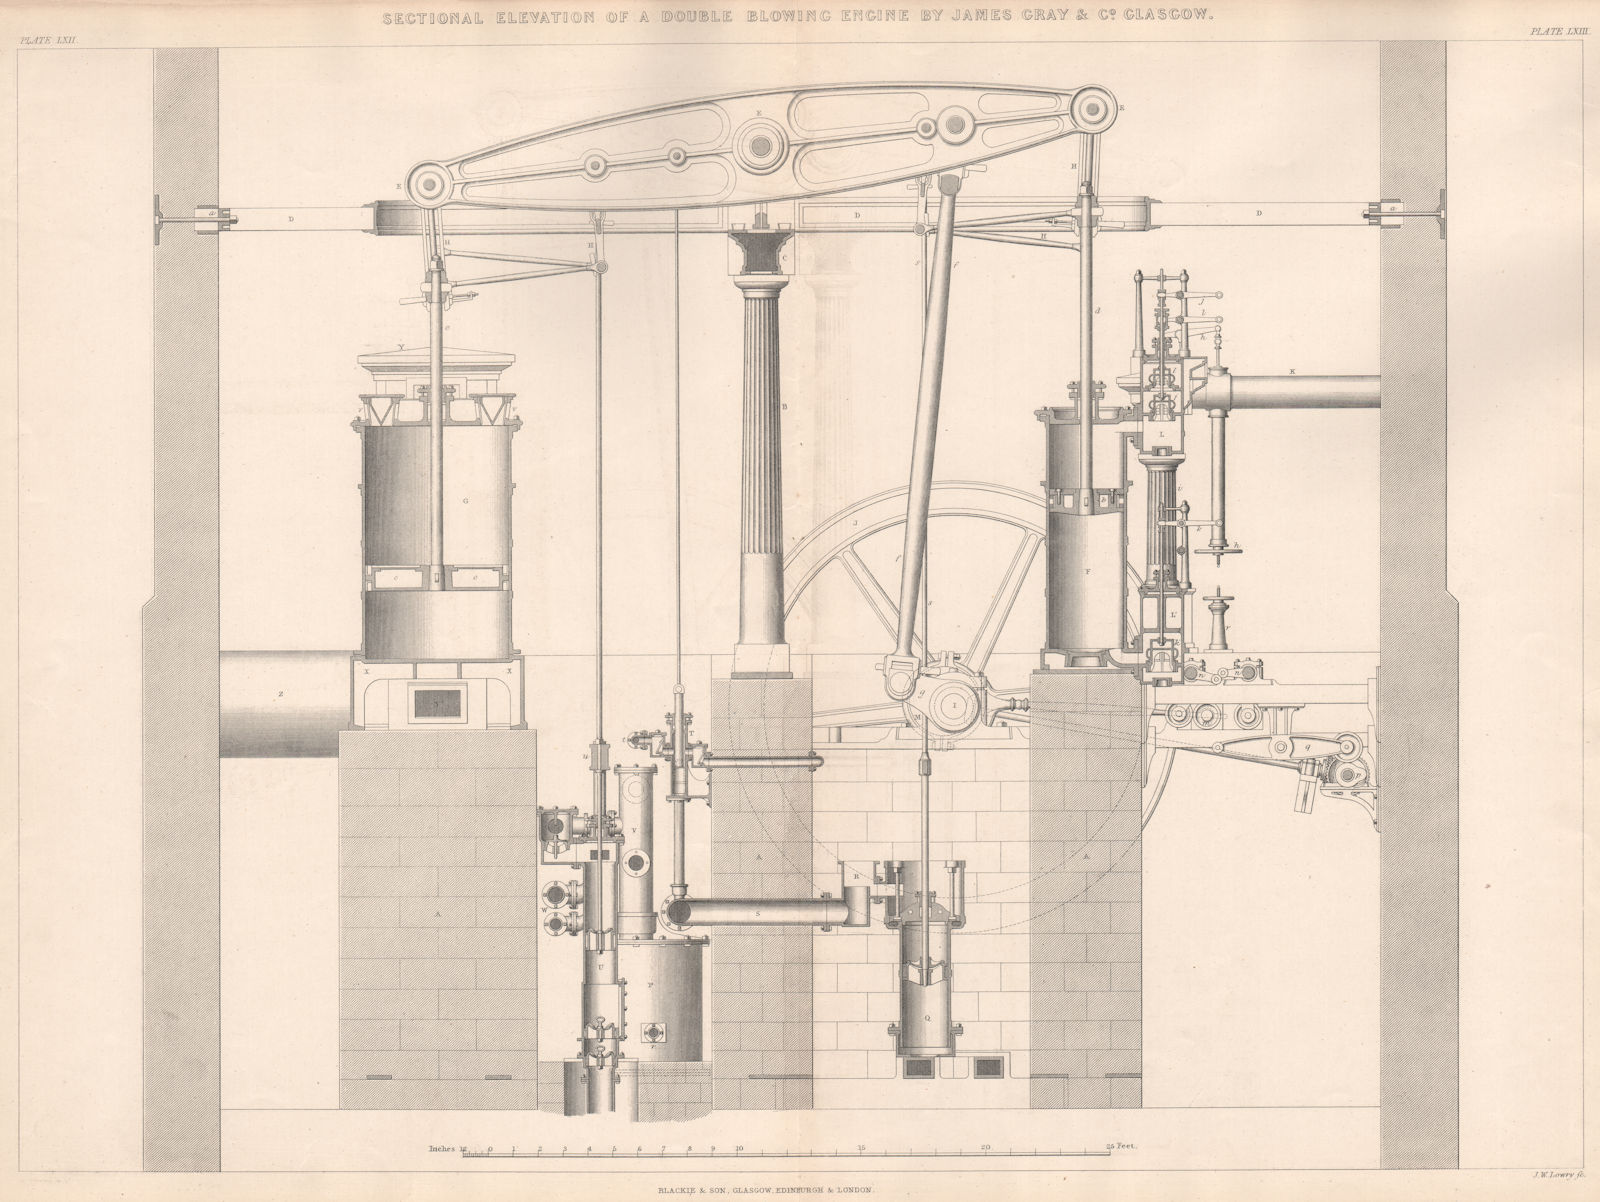 19C ENGINEERING DRAWING. Double blowing engine section. James Gray, Glasgow 1876